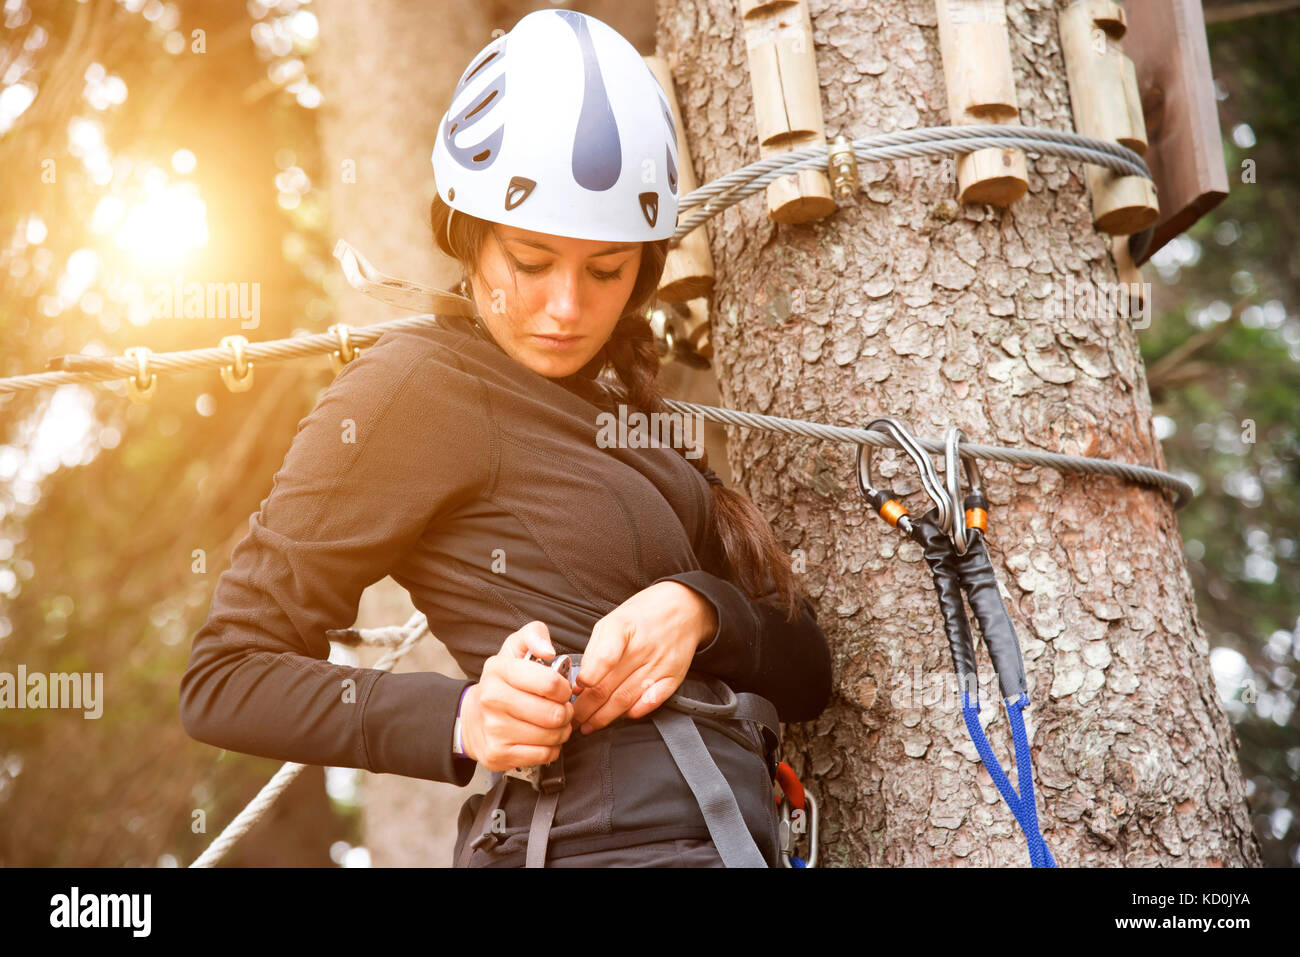 Teenage girl up tree preparing to use high rope course Stock Photo